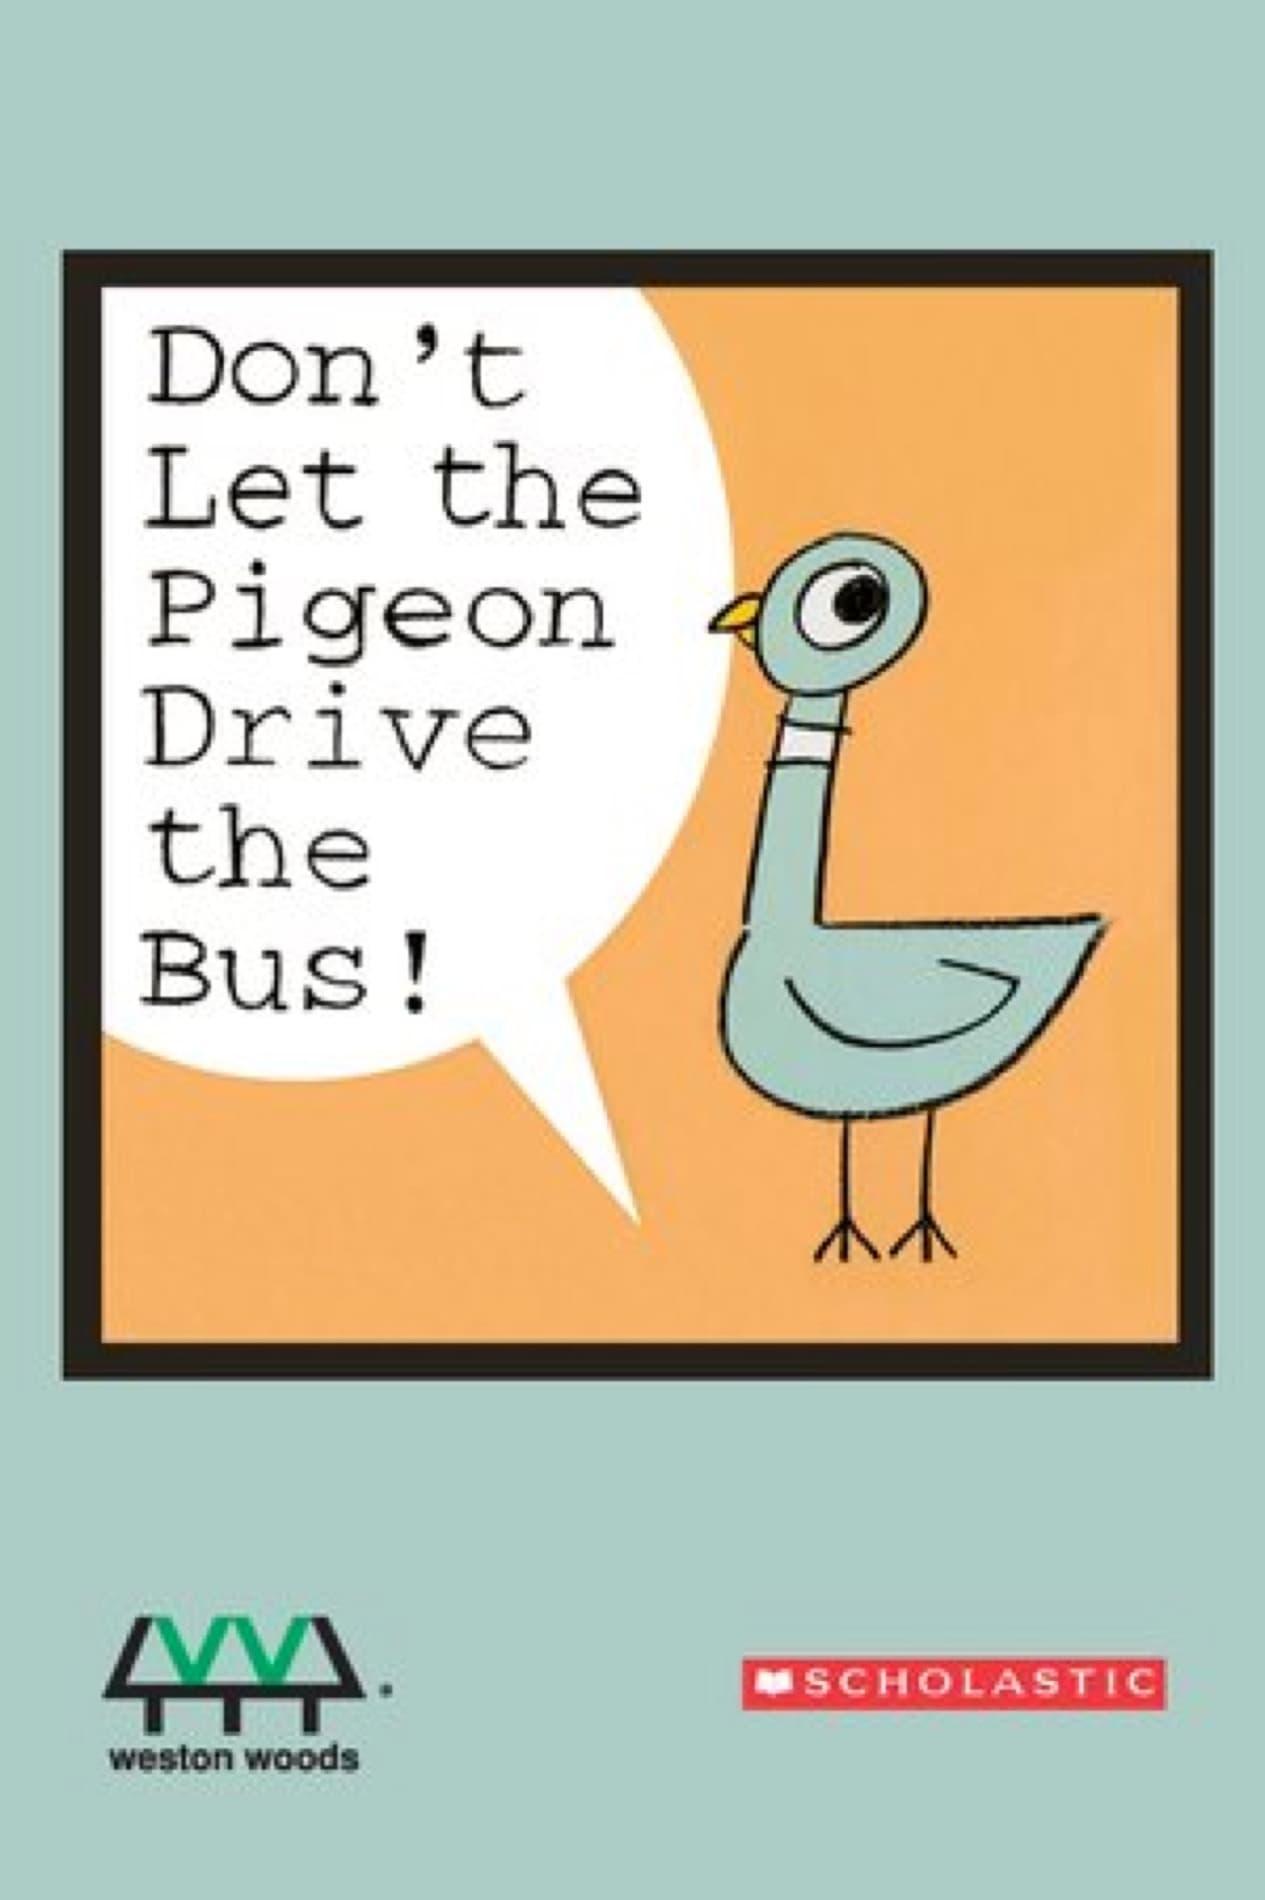 Don't Let the Pigeon Drive the Bus! poster